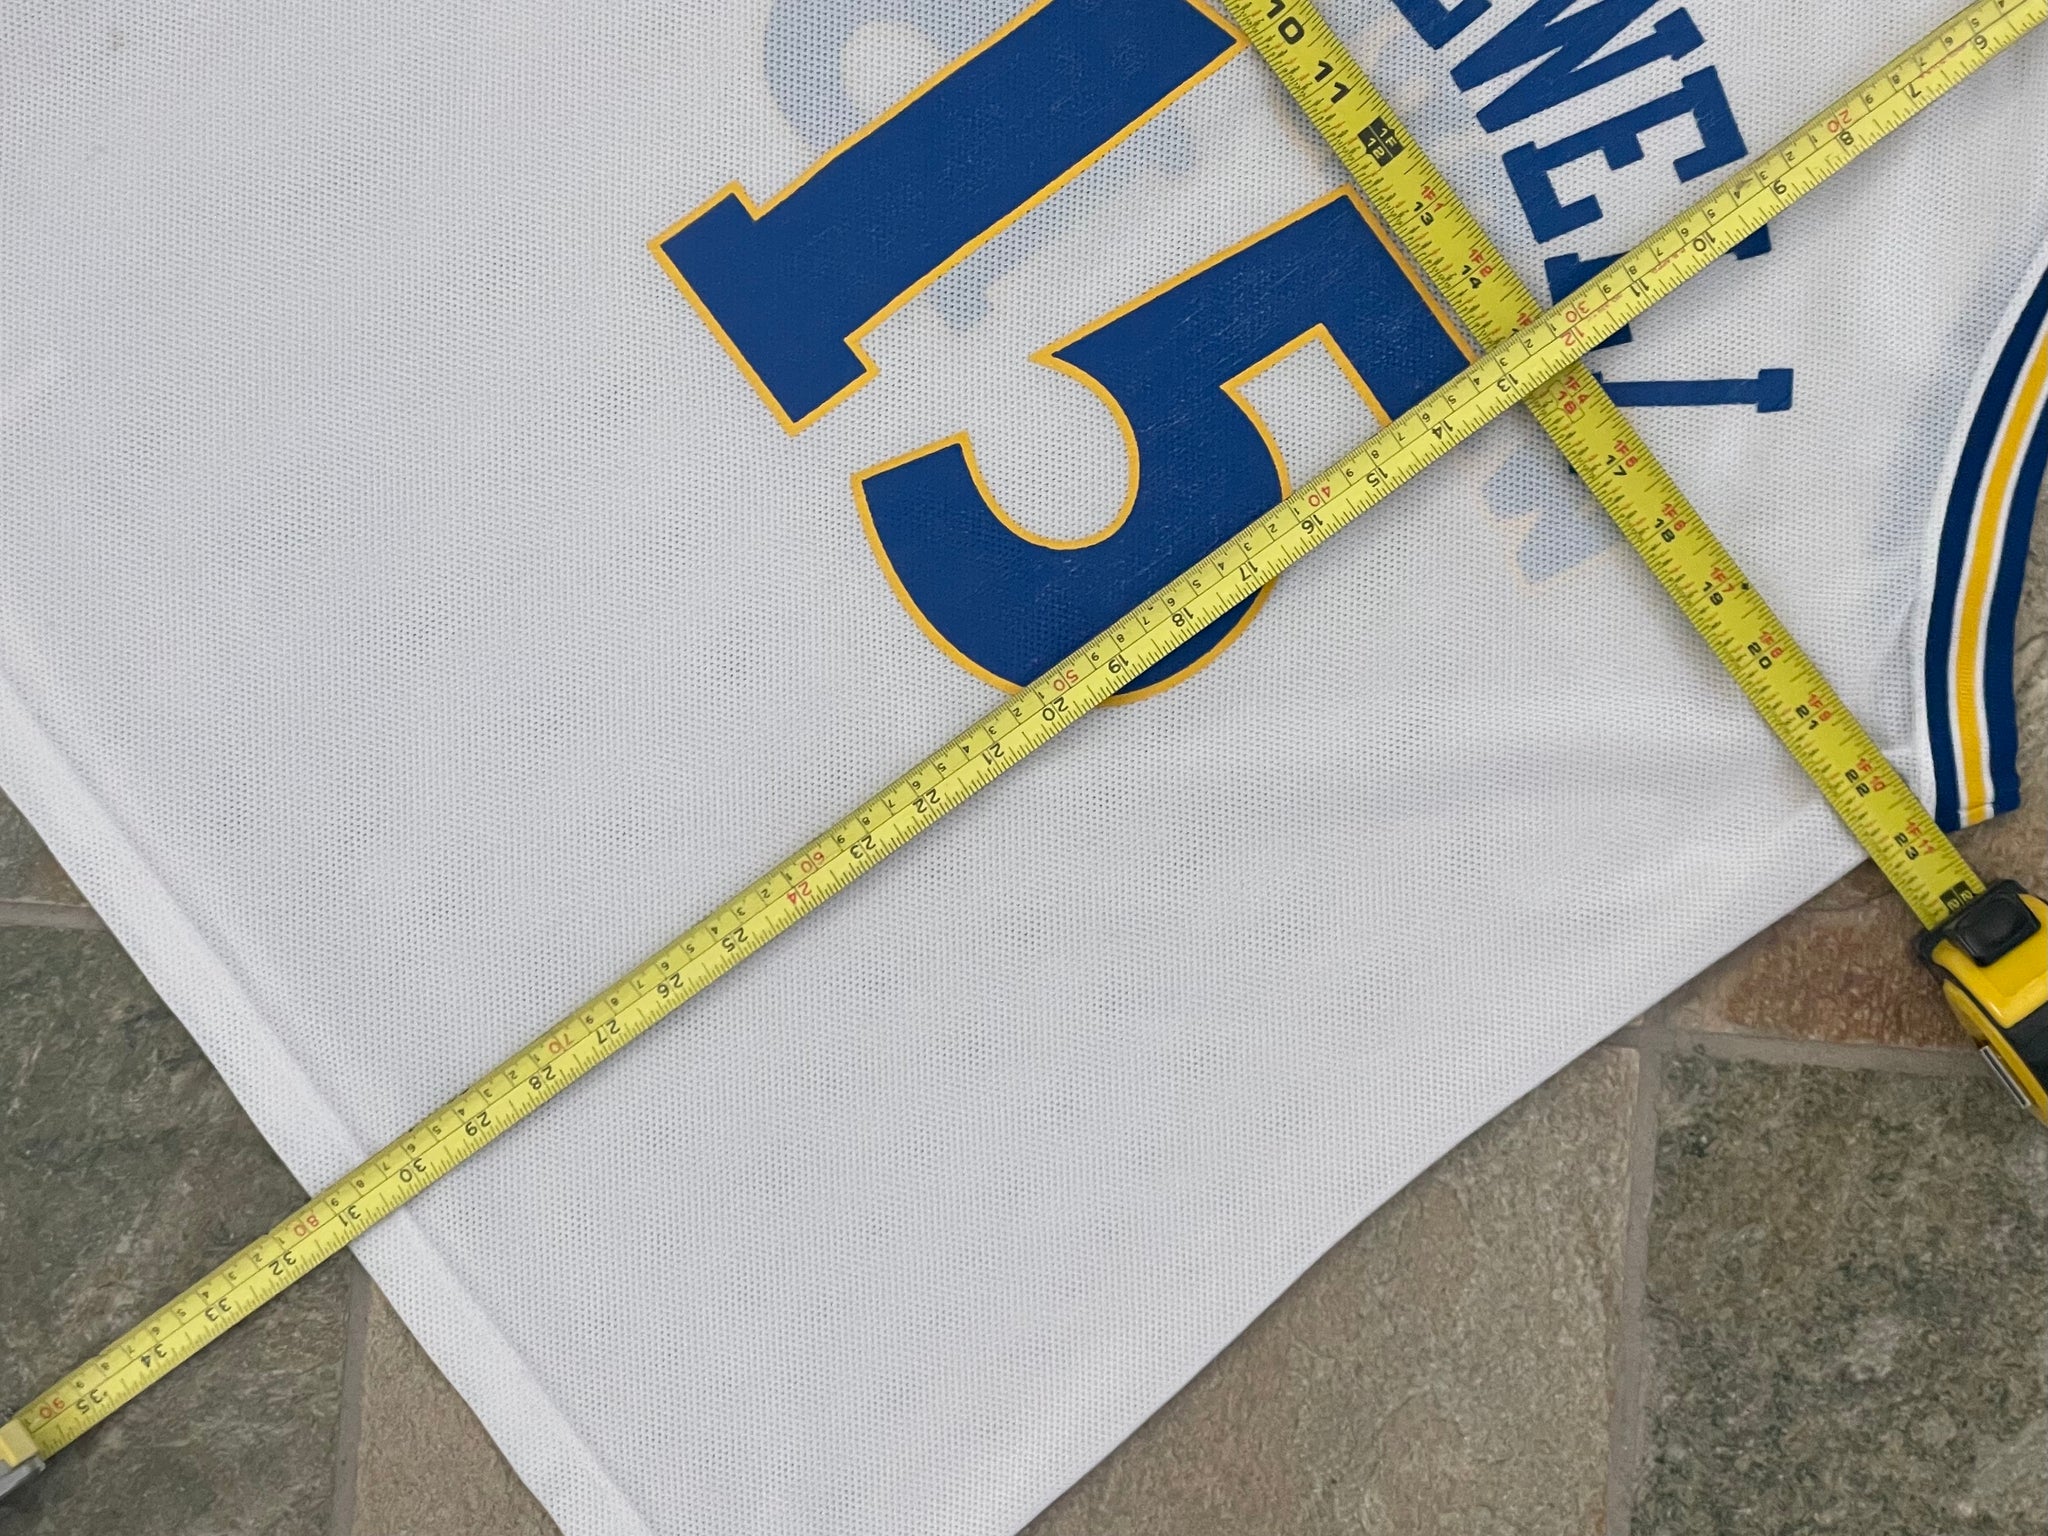 Latrell Sprewell Champion Jersey 48 Golden State Warriors XL Vintage Rare  for Sale in Oakland, CA - OfferUp